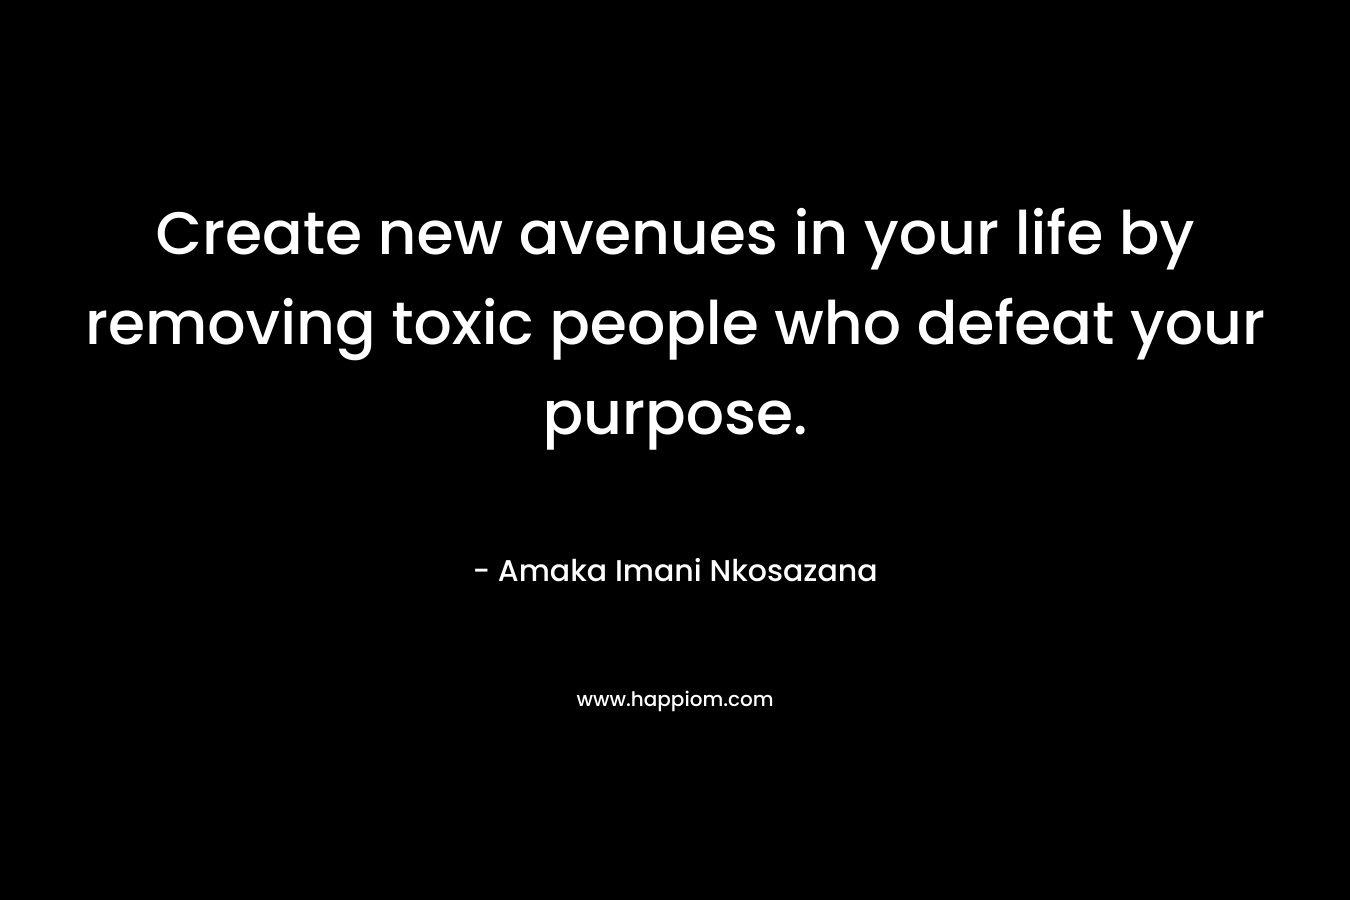 Create new avenues in your life by removing toxic people who defeat your purpose.